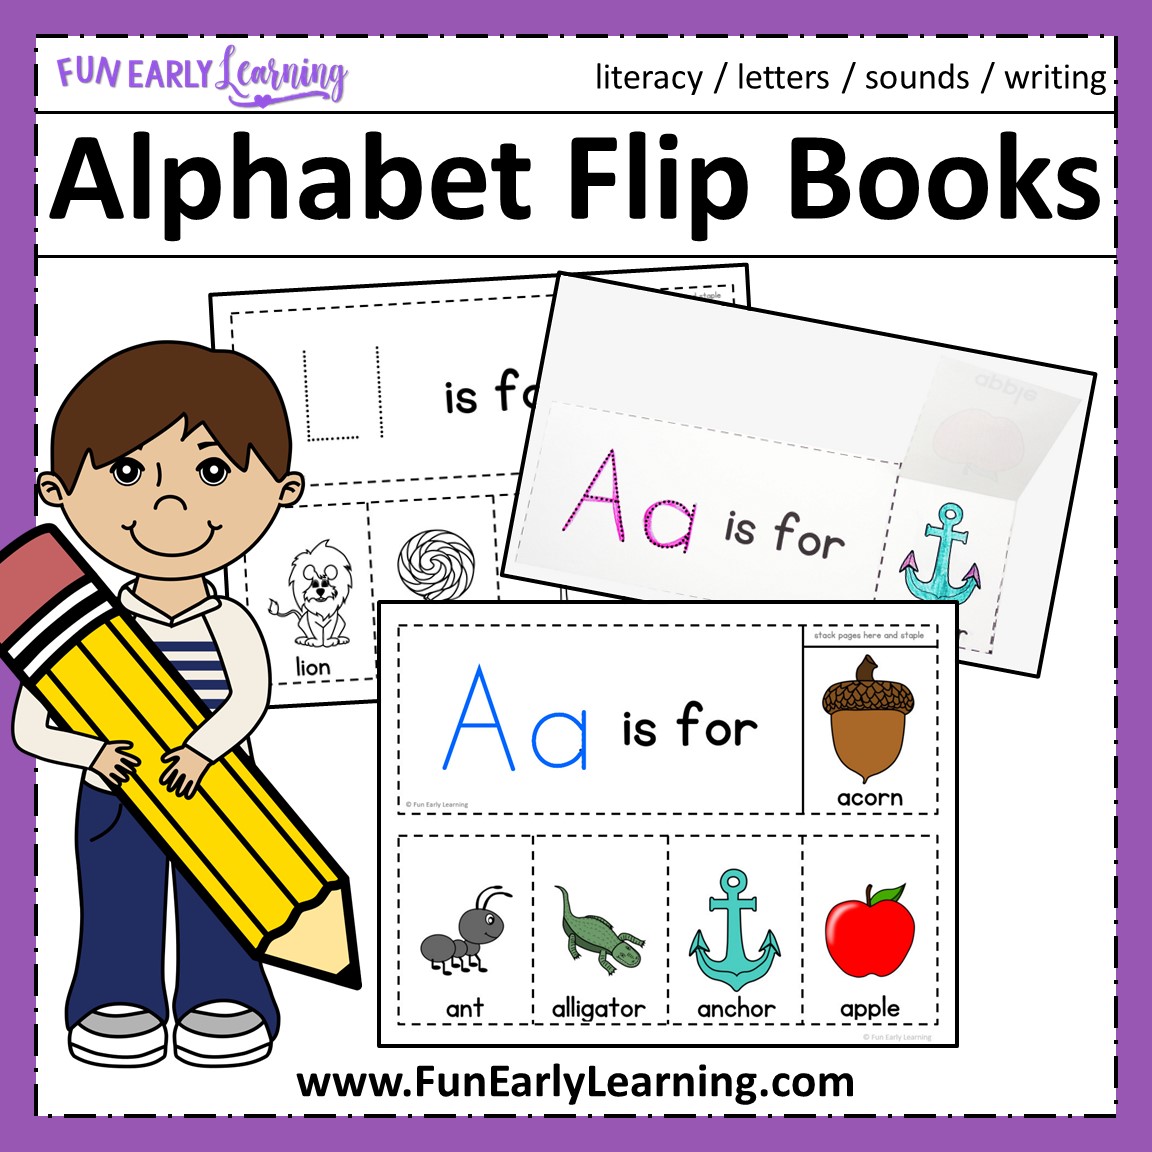 alphabet-flip-books-letters-and-phonics-activity-for-preschool-and-kinder